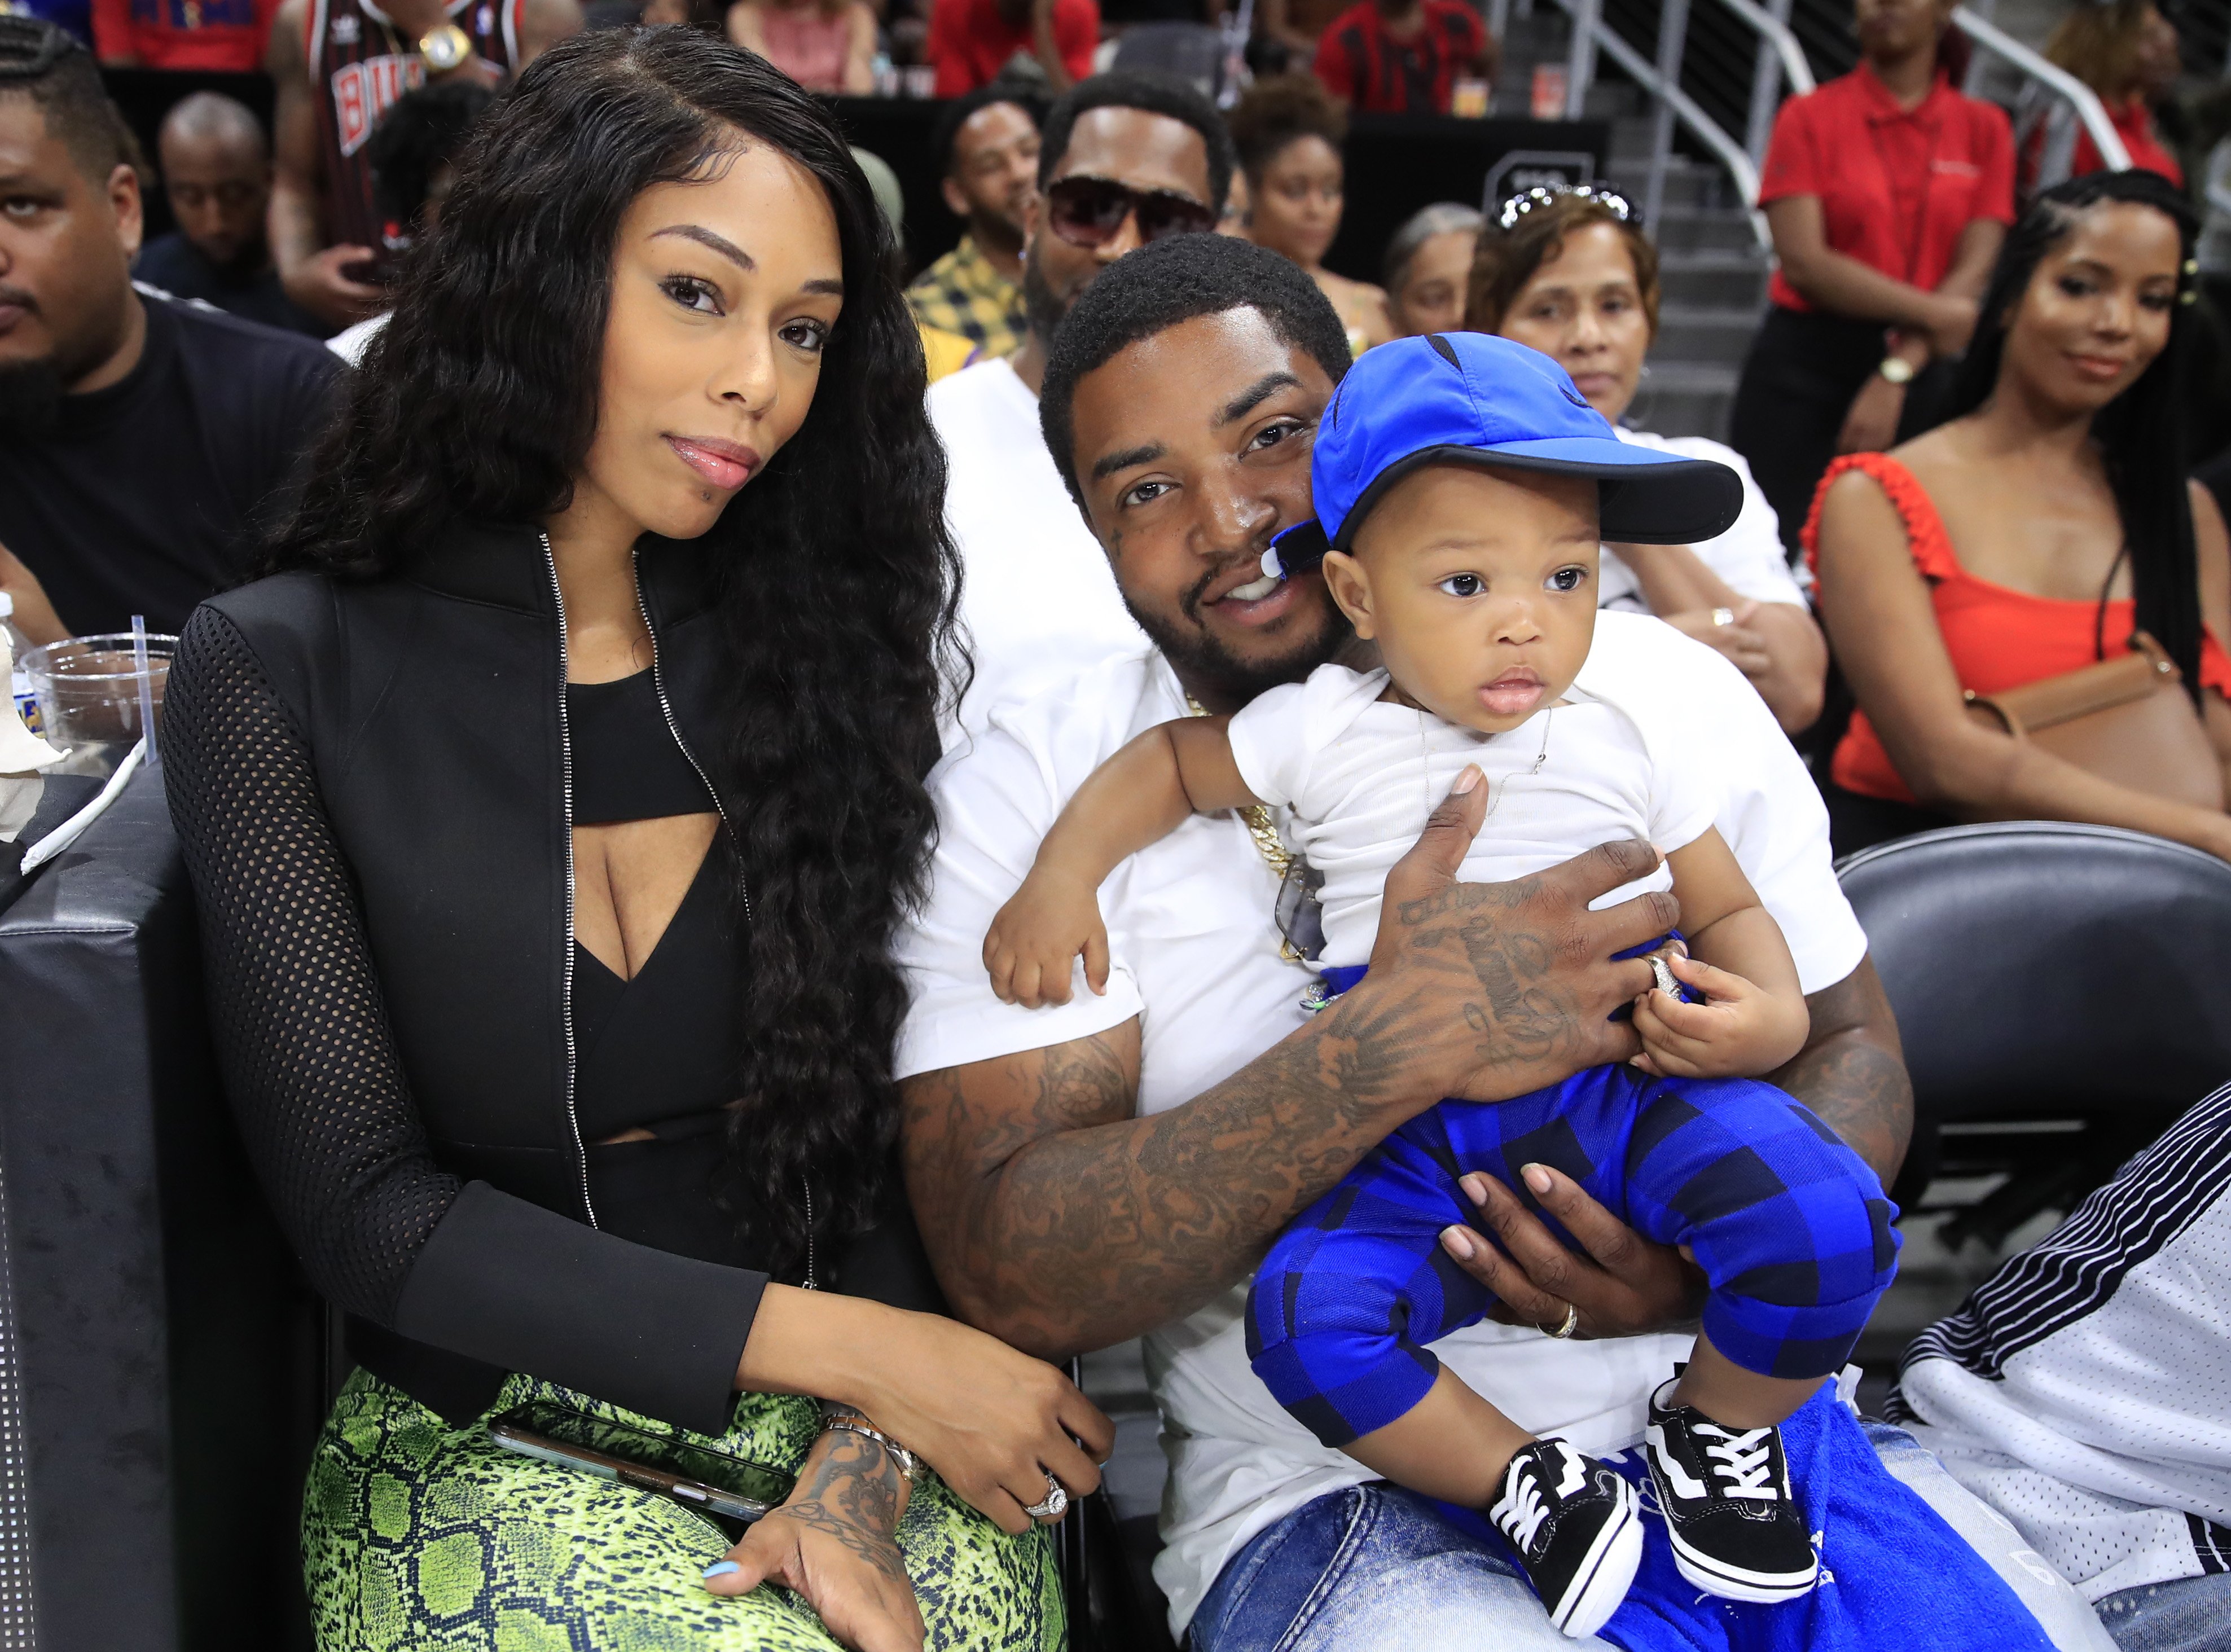 Bambi, Lil Scrappy and Breland at the game between Power and Trilogy at State Farm Arena on July 07, 2019 in Atlanta, Georgia. | Source: Getty Images